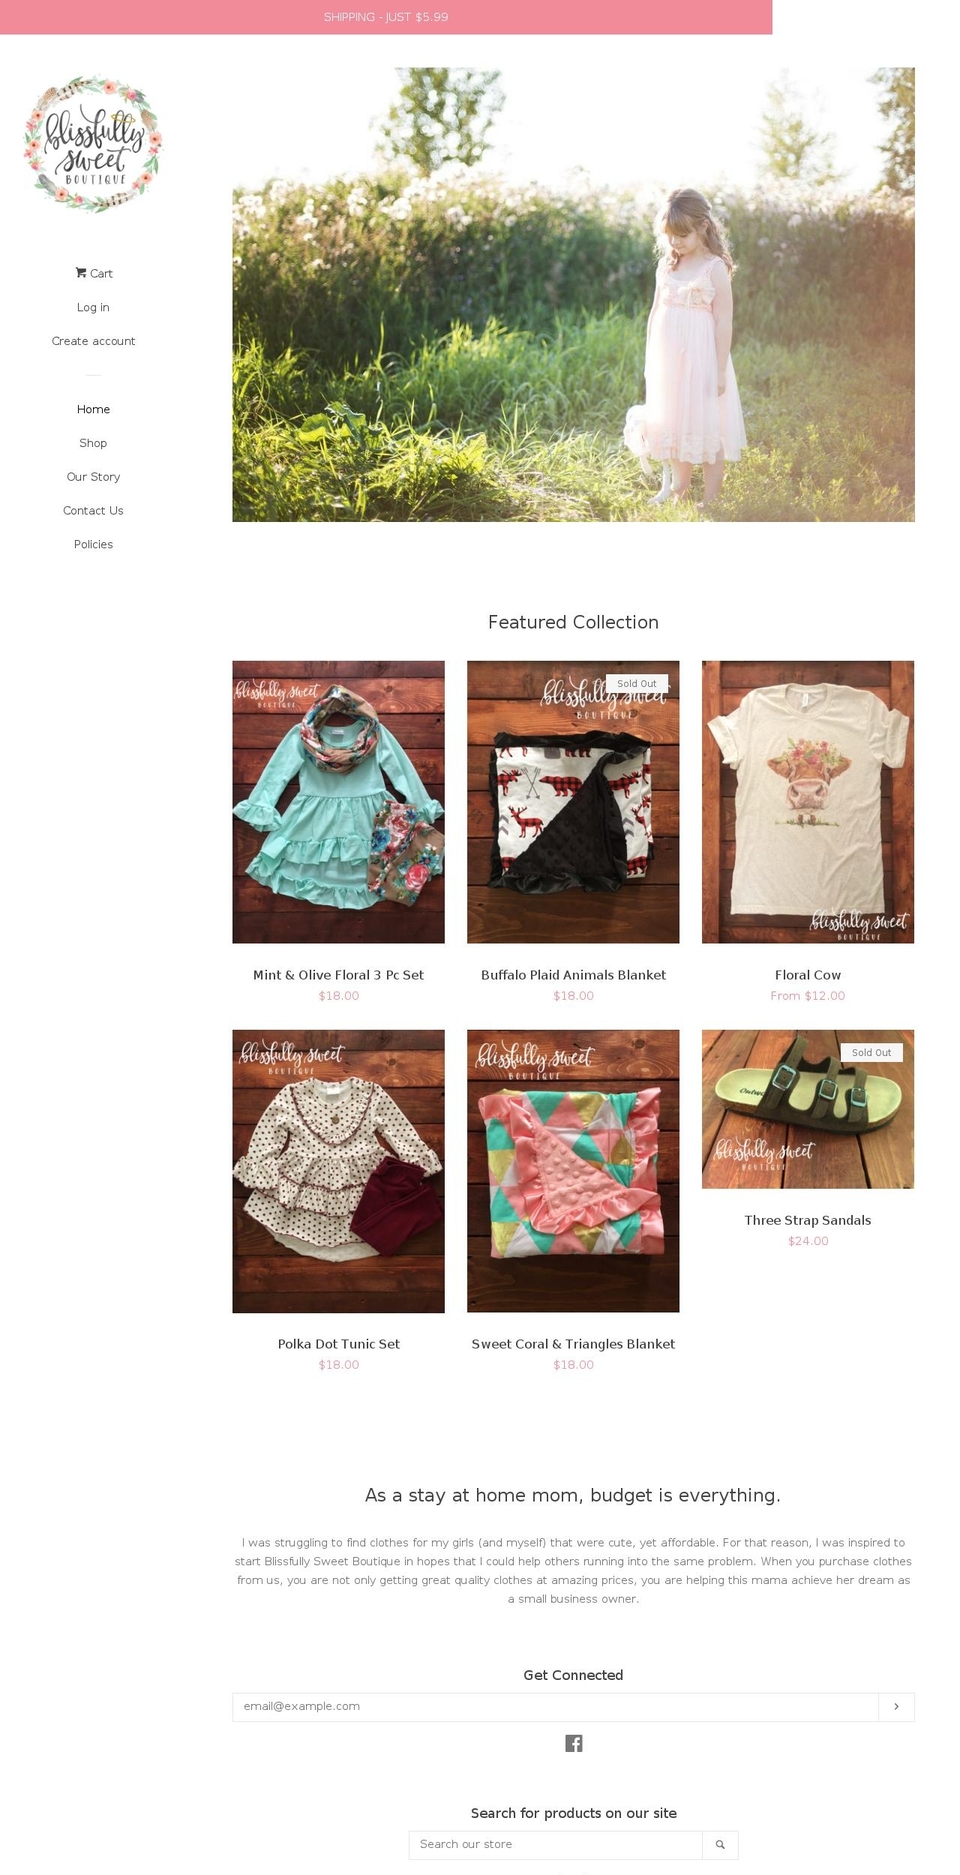 Wholesale Shopify theme site example blissfullysweetboutique.com